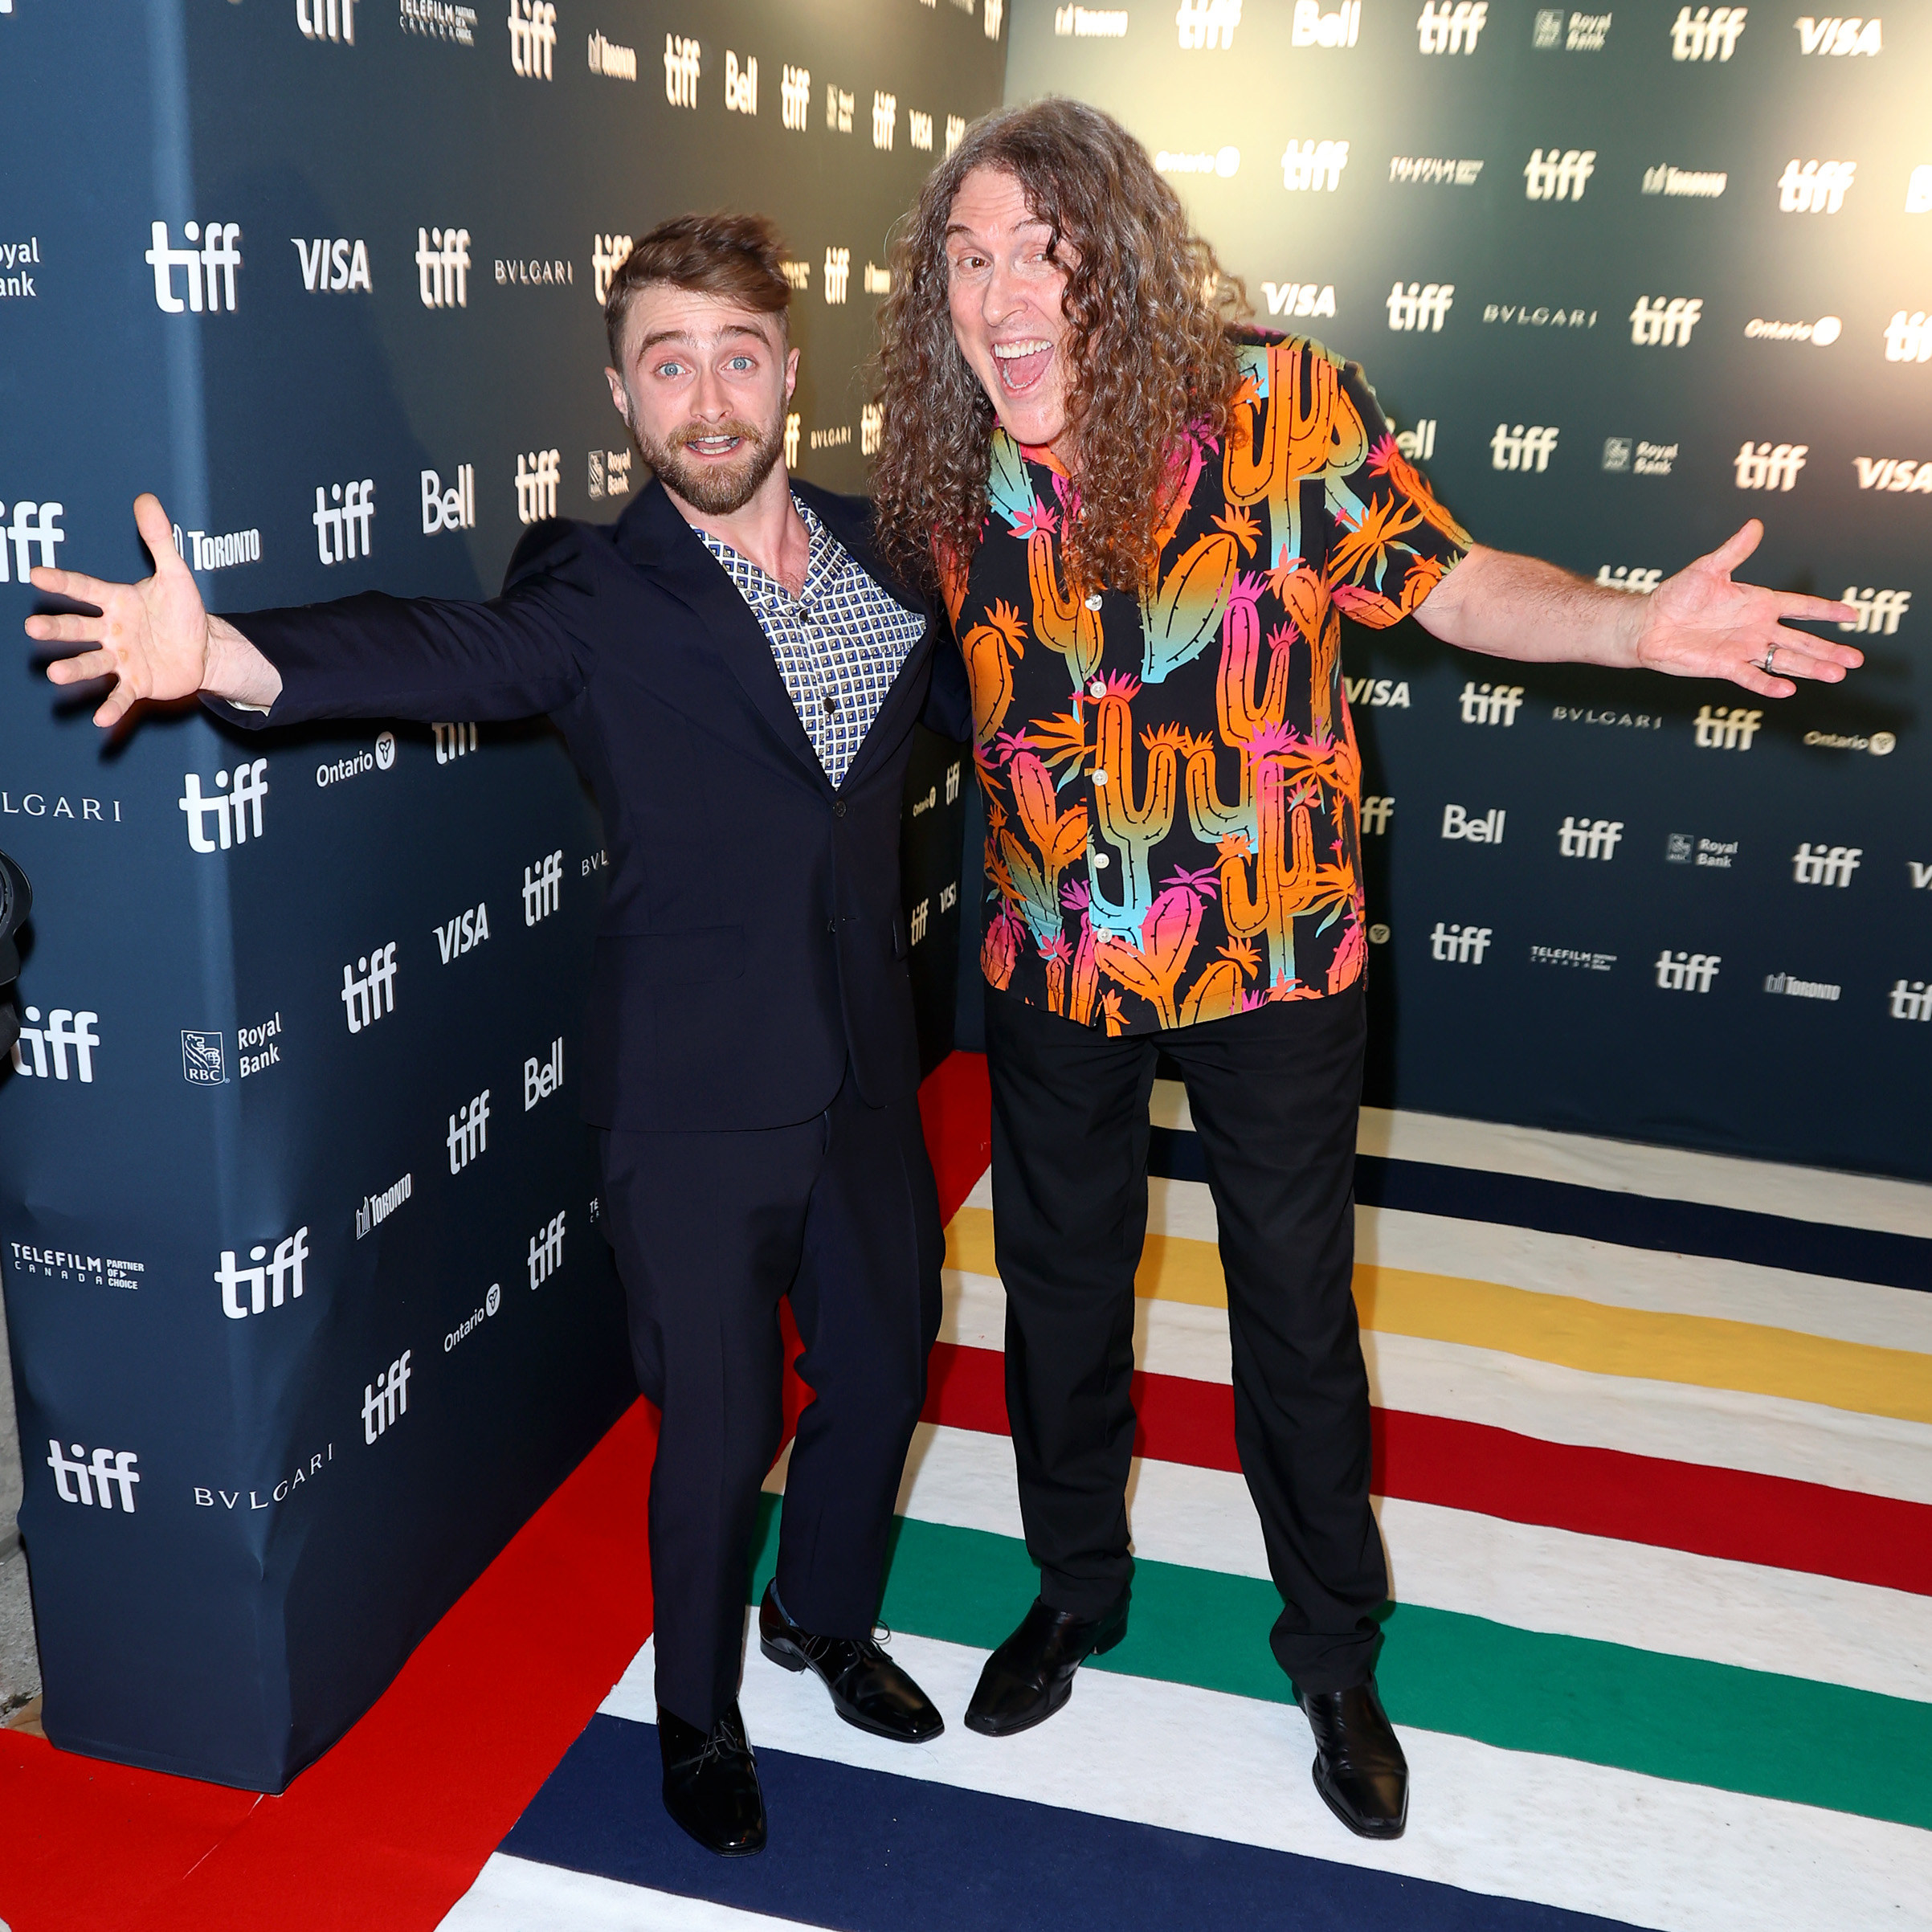 Daniel and Al do a silly pose together for photographers at a red carpet event